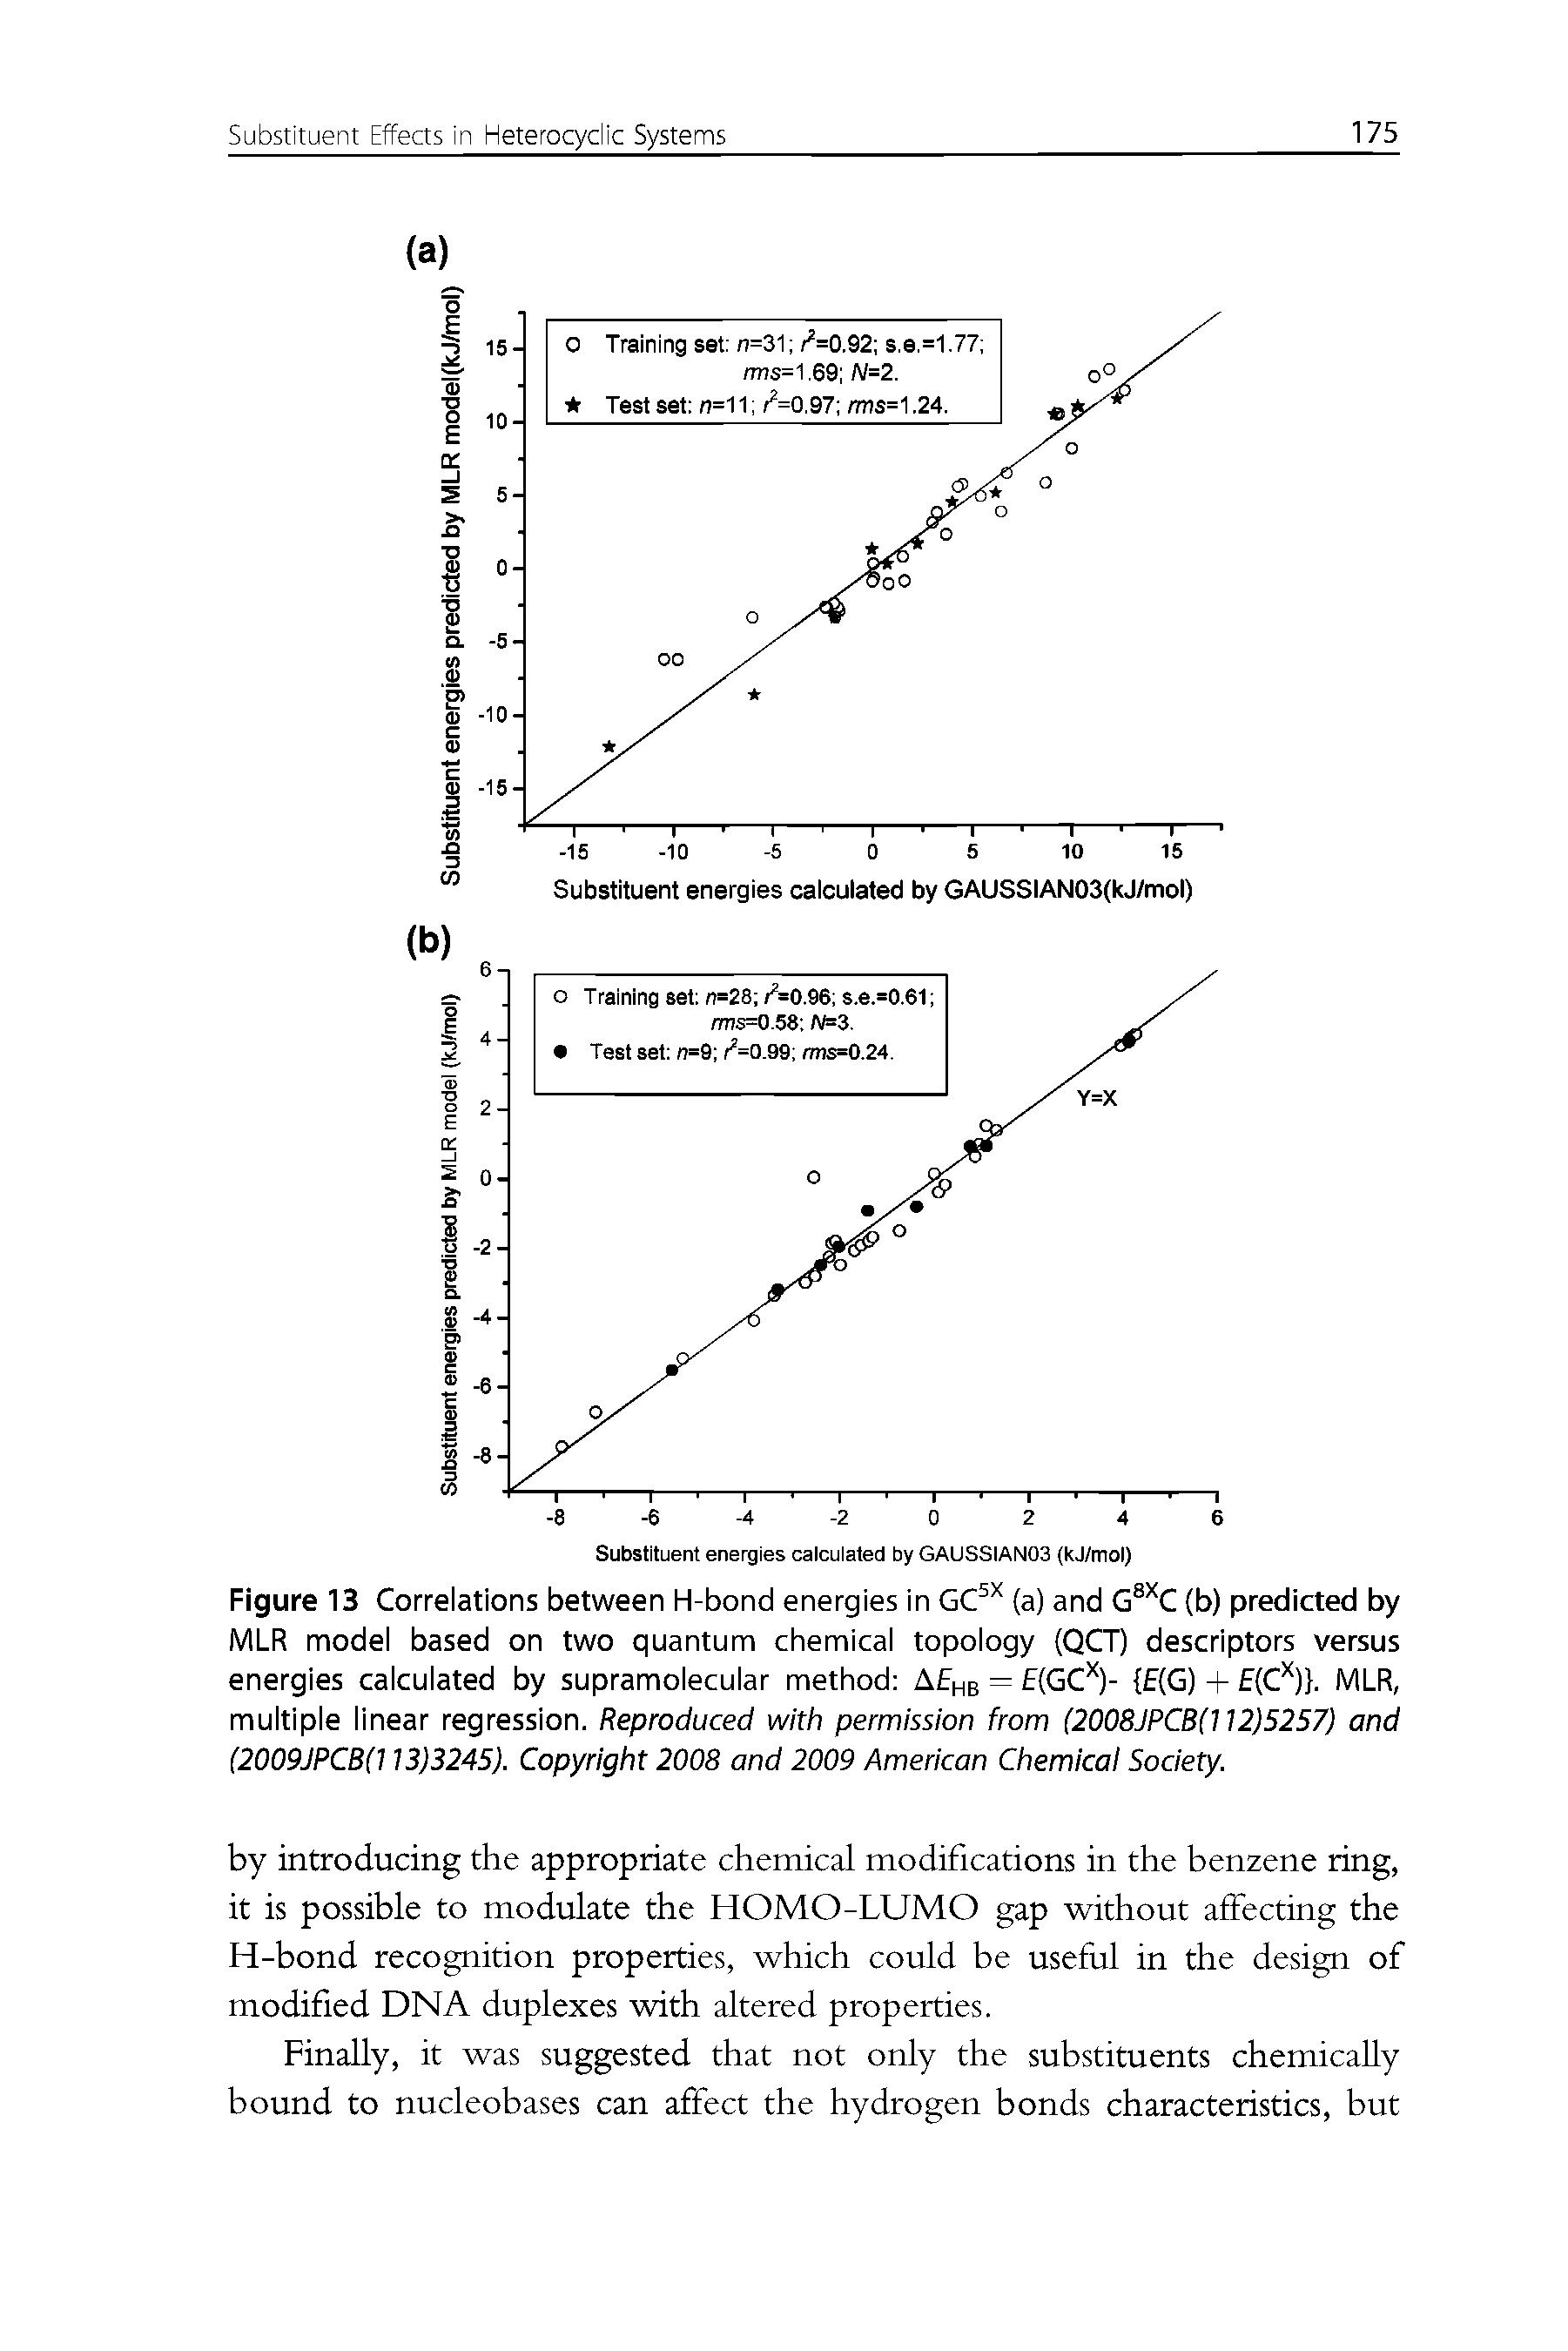 Figure 13 Correlations between H-bond energies in (a) and G C (b) predicted by MLR model based on two quantum chemical topology (QCT) descriptors versus energies calculated by supramolecular method A hb = E GC (G) + (C ). MLR, multiple linear regression. Reproduced with permission from (2008JPCB(112)5257) and (2009JPCB(113)3245). Copyright 2008 and 2009 American Chemical Society.